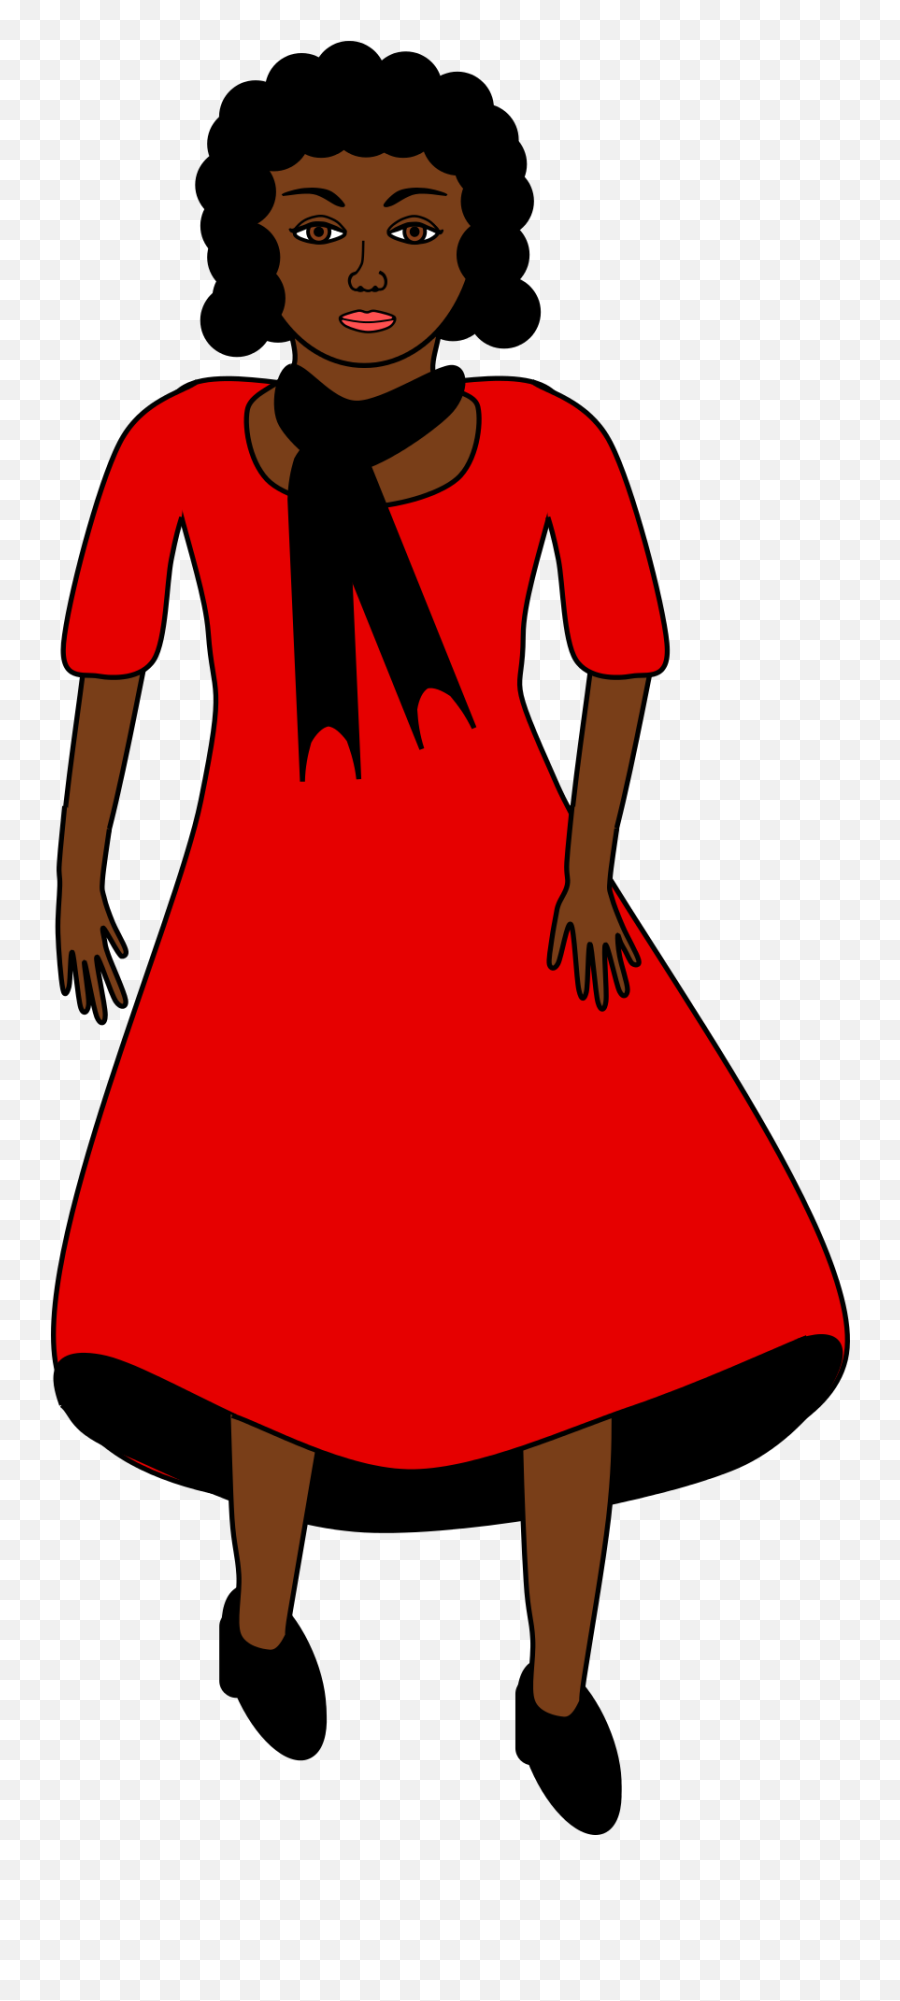 Drawing Of A Black Woman In A Red Dress Free Image Download Emoji,Black Dress Png